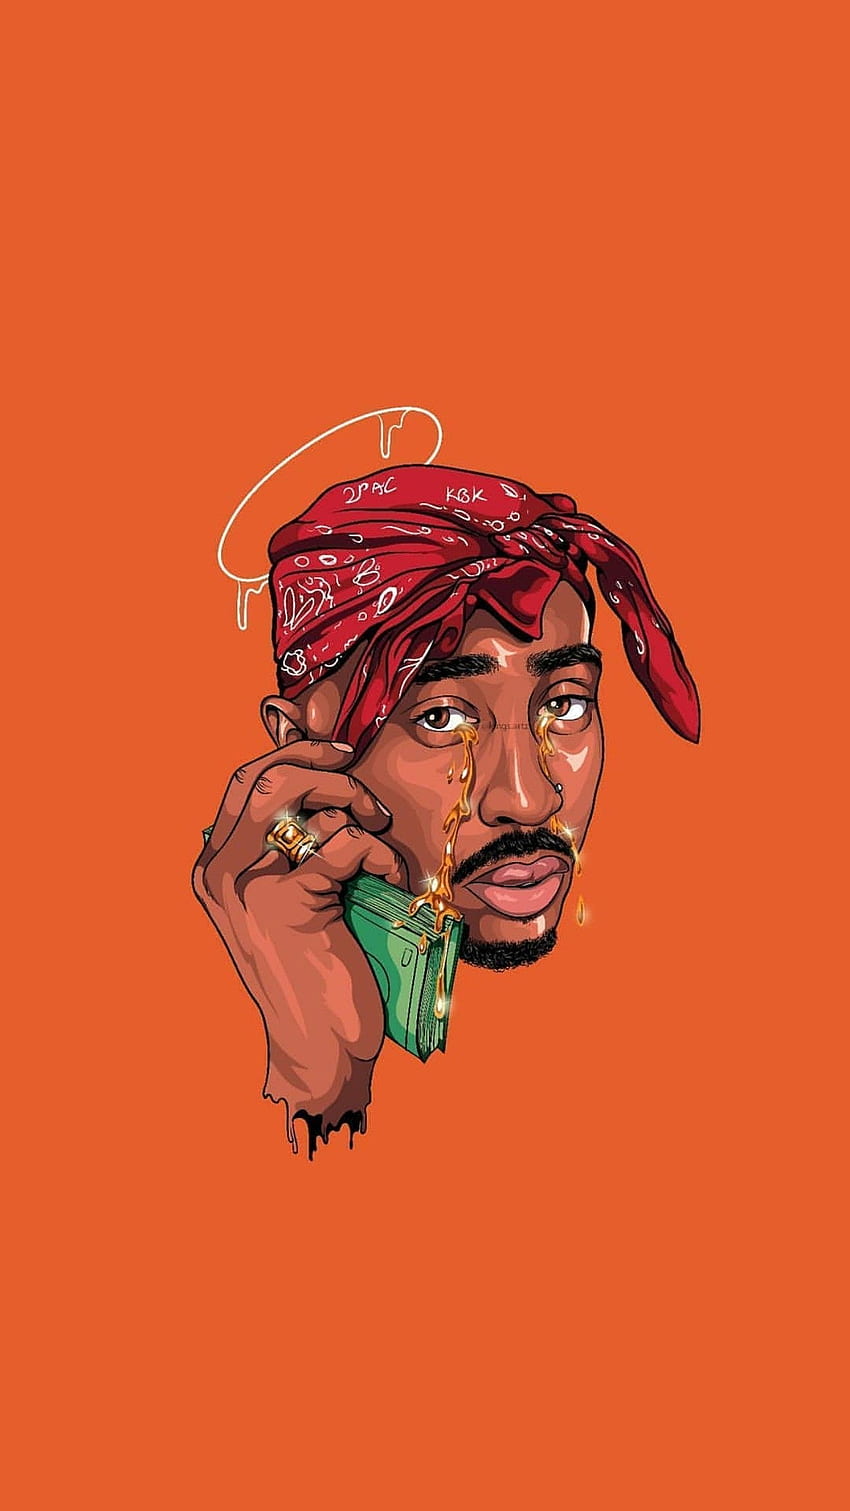 2Pac Wallpaper Discover more Actor Professional Rapper Singer  Songwriter wallpaper httpswwwenwallpapercom2pac  Tupac wallpaper  Tupac poster 2pac art